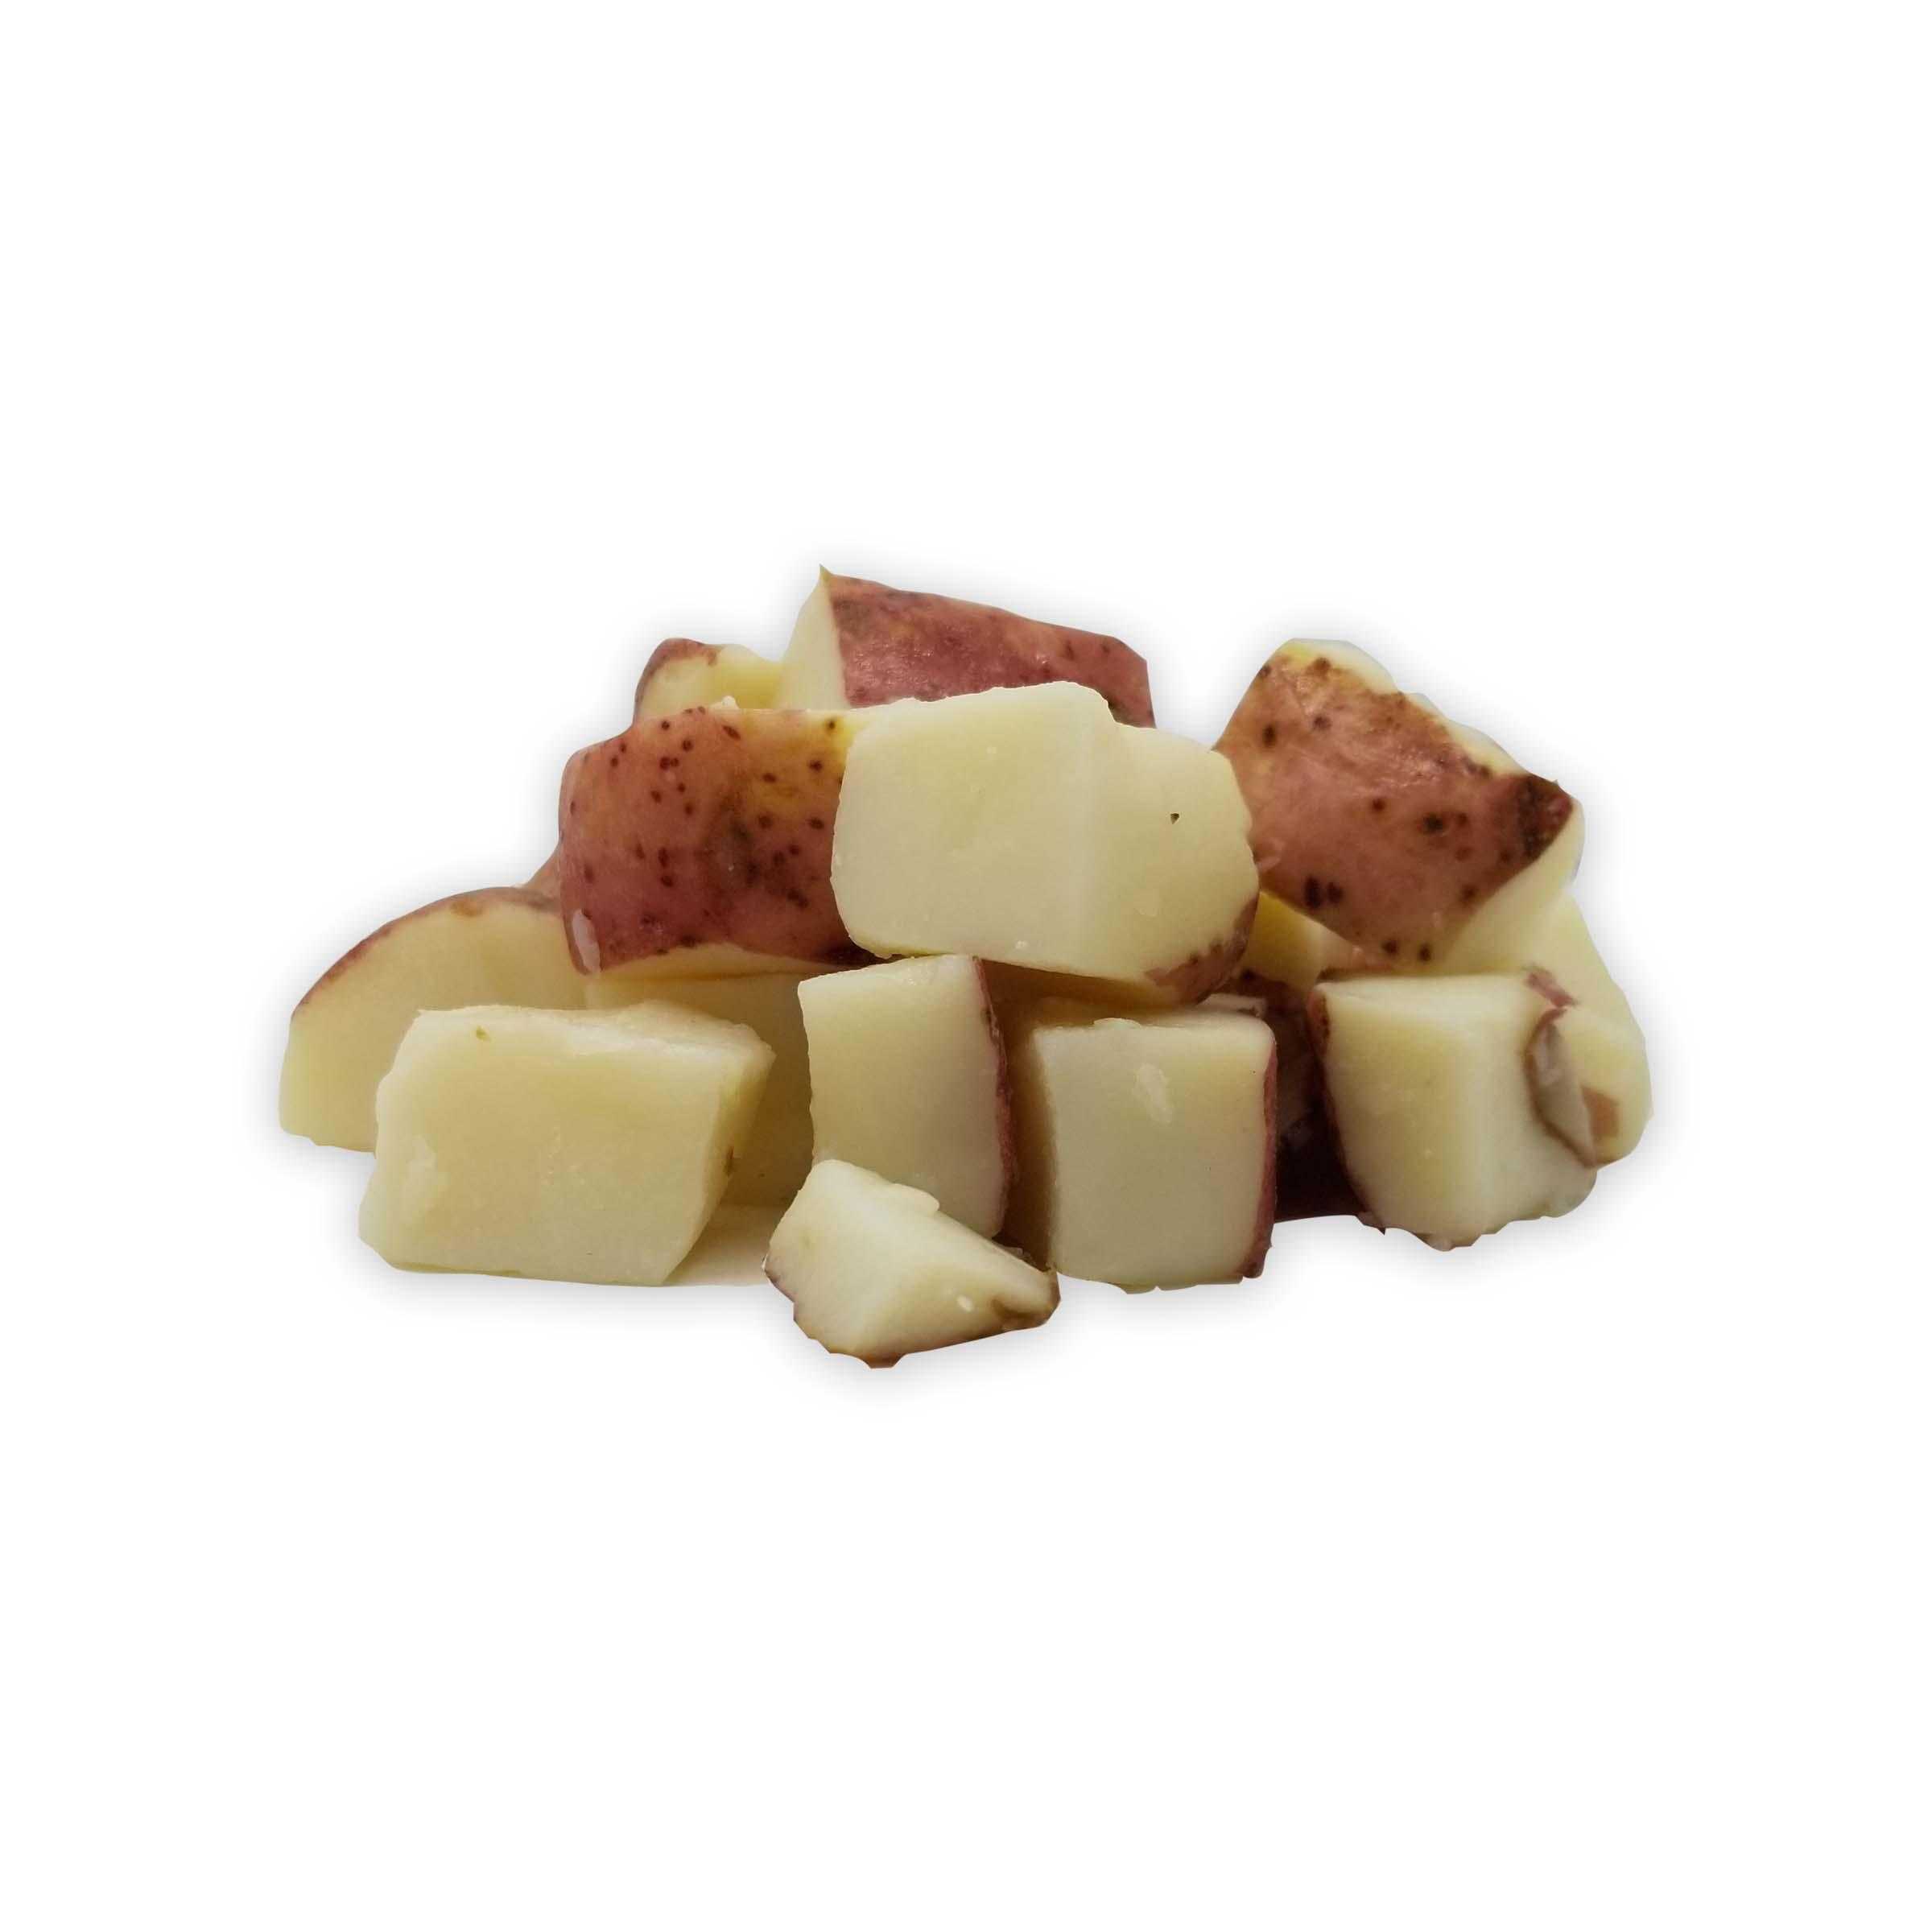 Simply Potatoes® Refrigerated 1″ Red Skin Diced Potatoes made with skin-on Red potatoes diced 1″ x 7/8″ x 3/4″, 2/10 Lb Bags